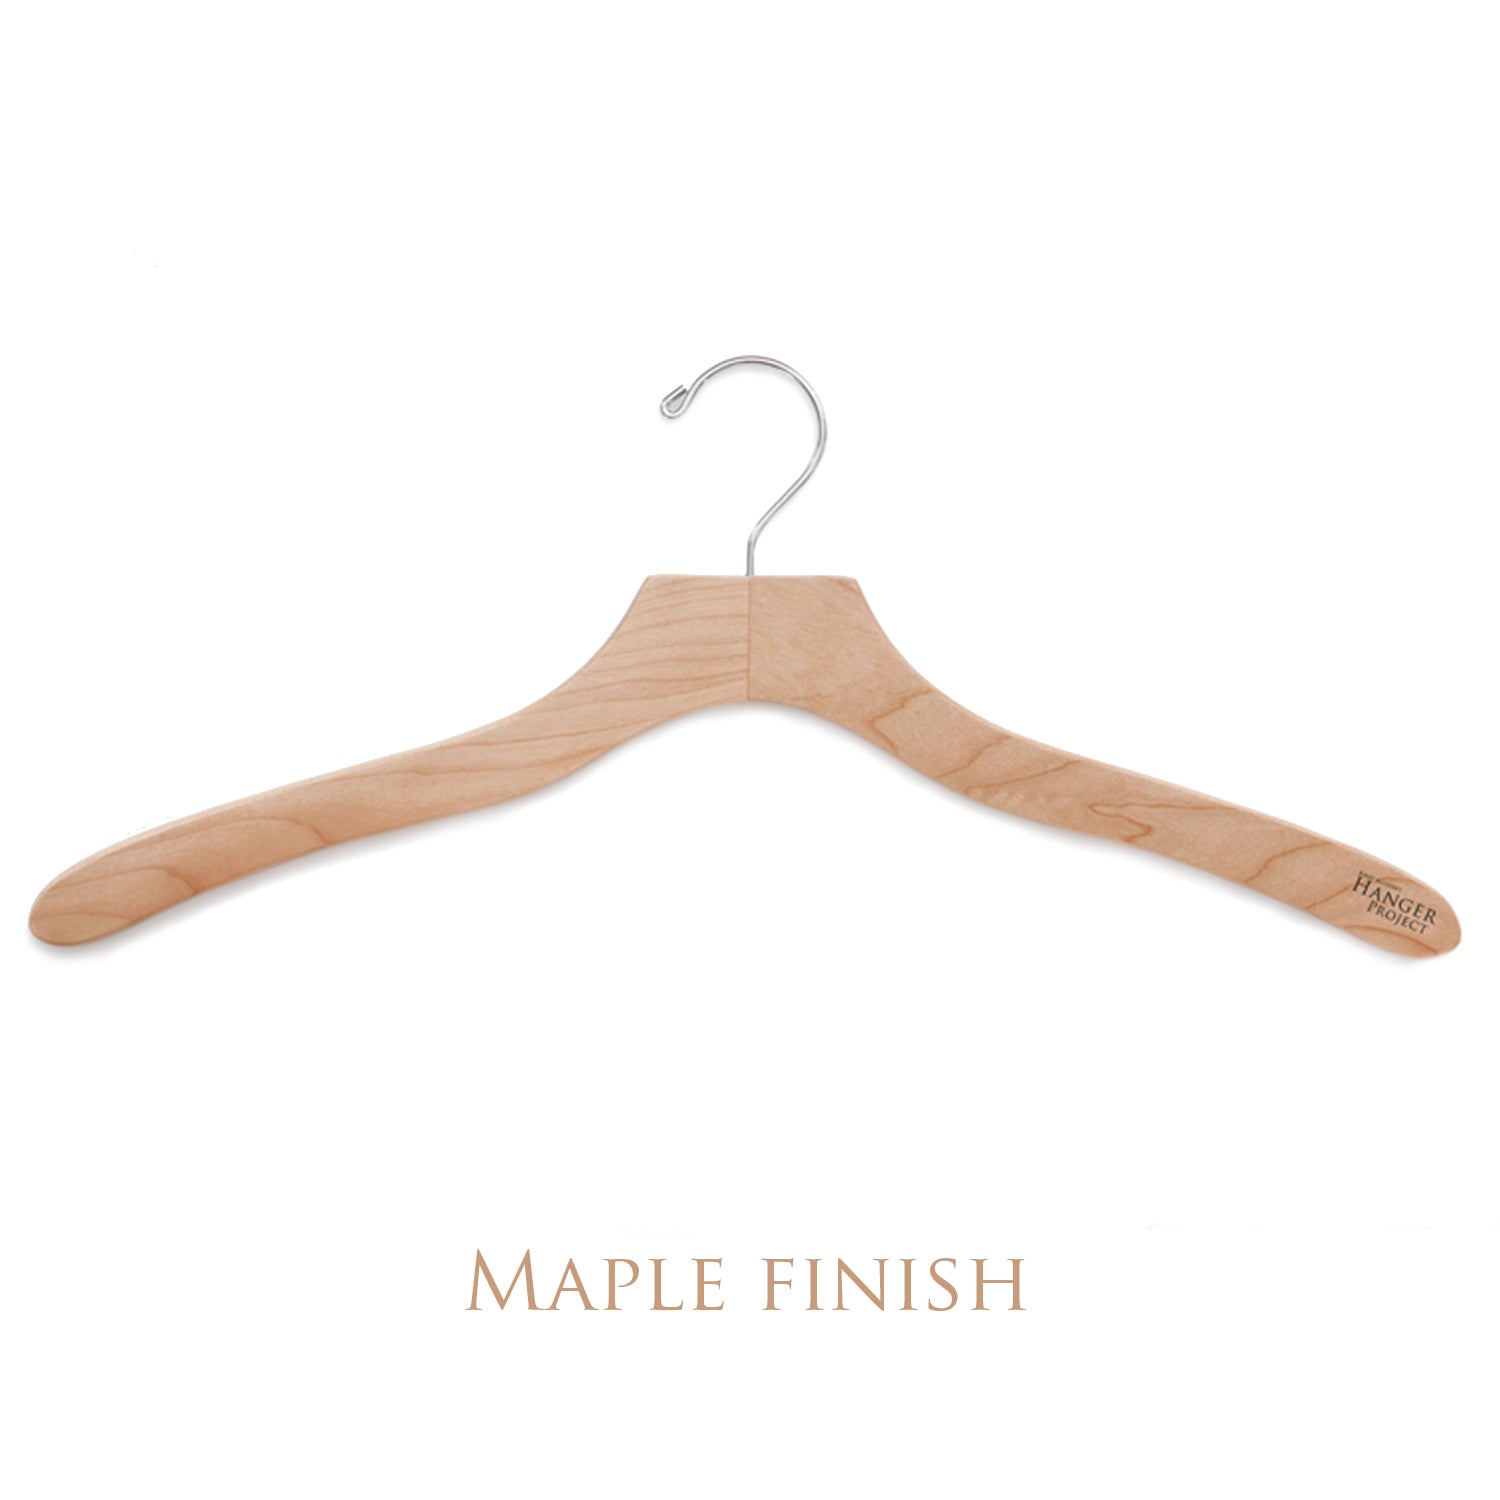 Lifemaster Tough Long Lasting Solid Maple Wooden Clothes Hangers